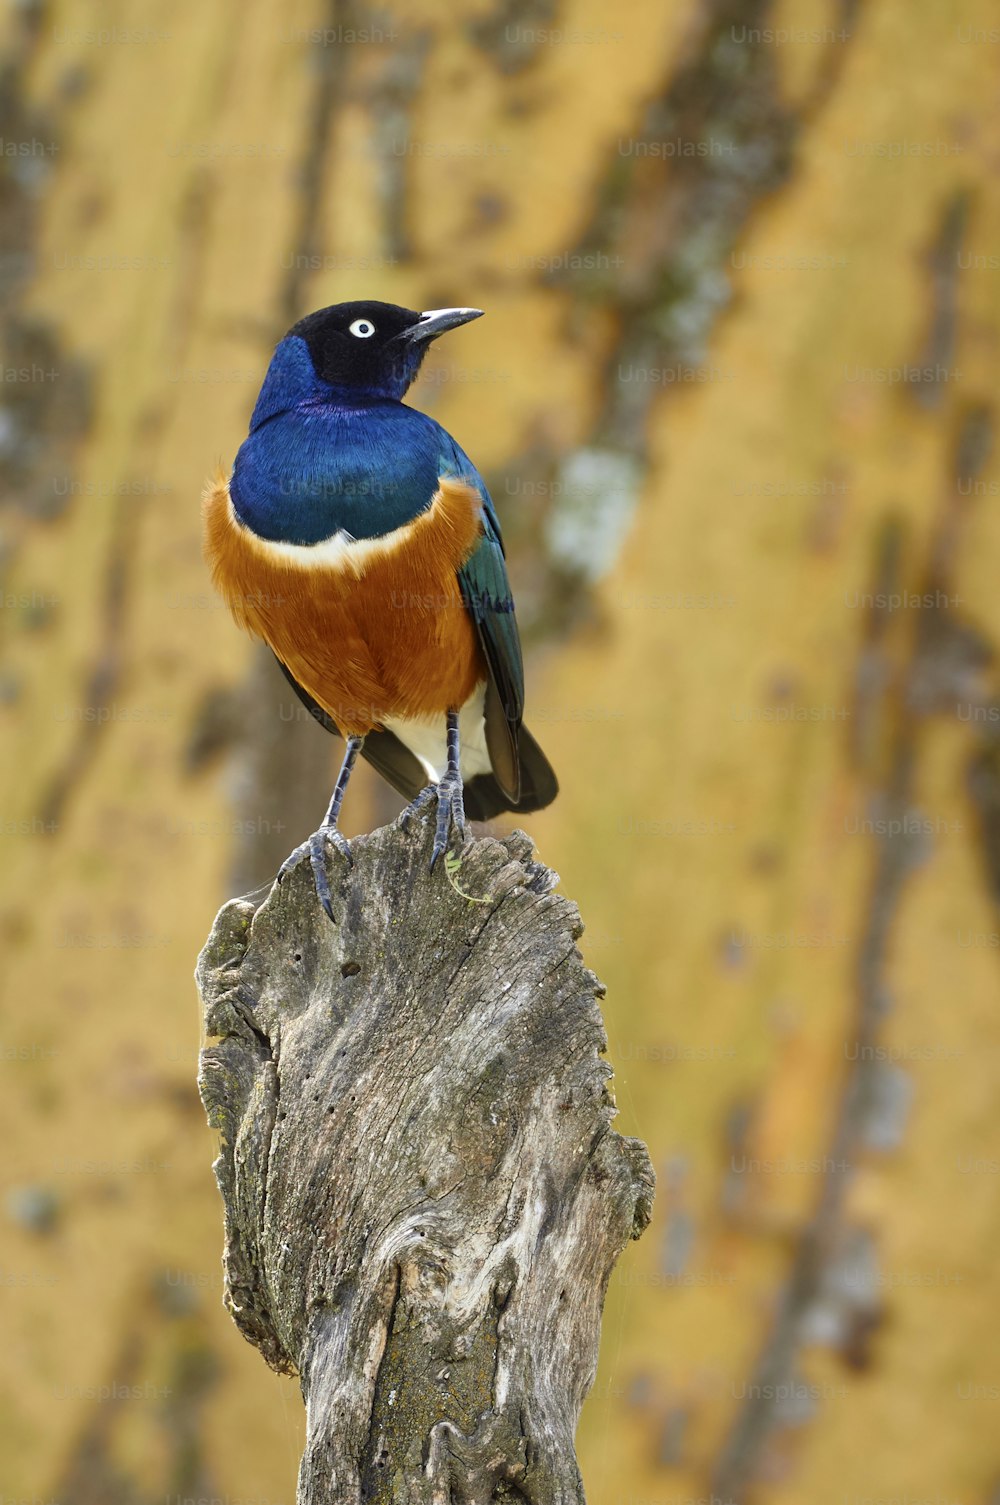 Superb starling resting on a piece of wood in a national park in Kenya